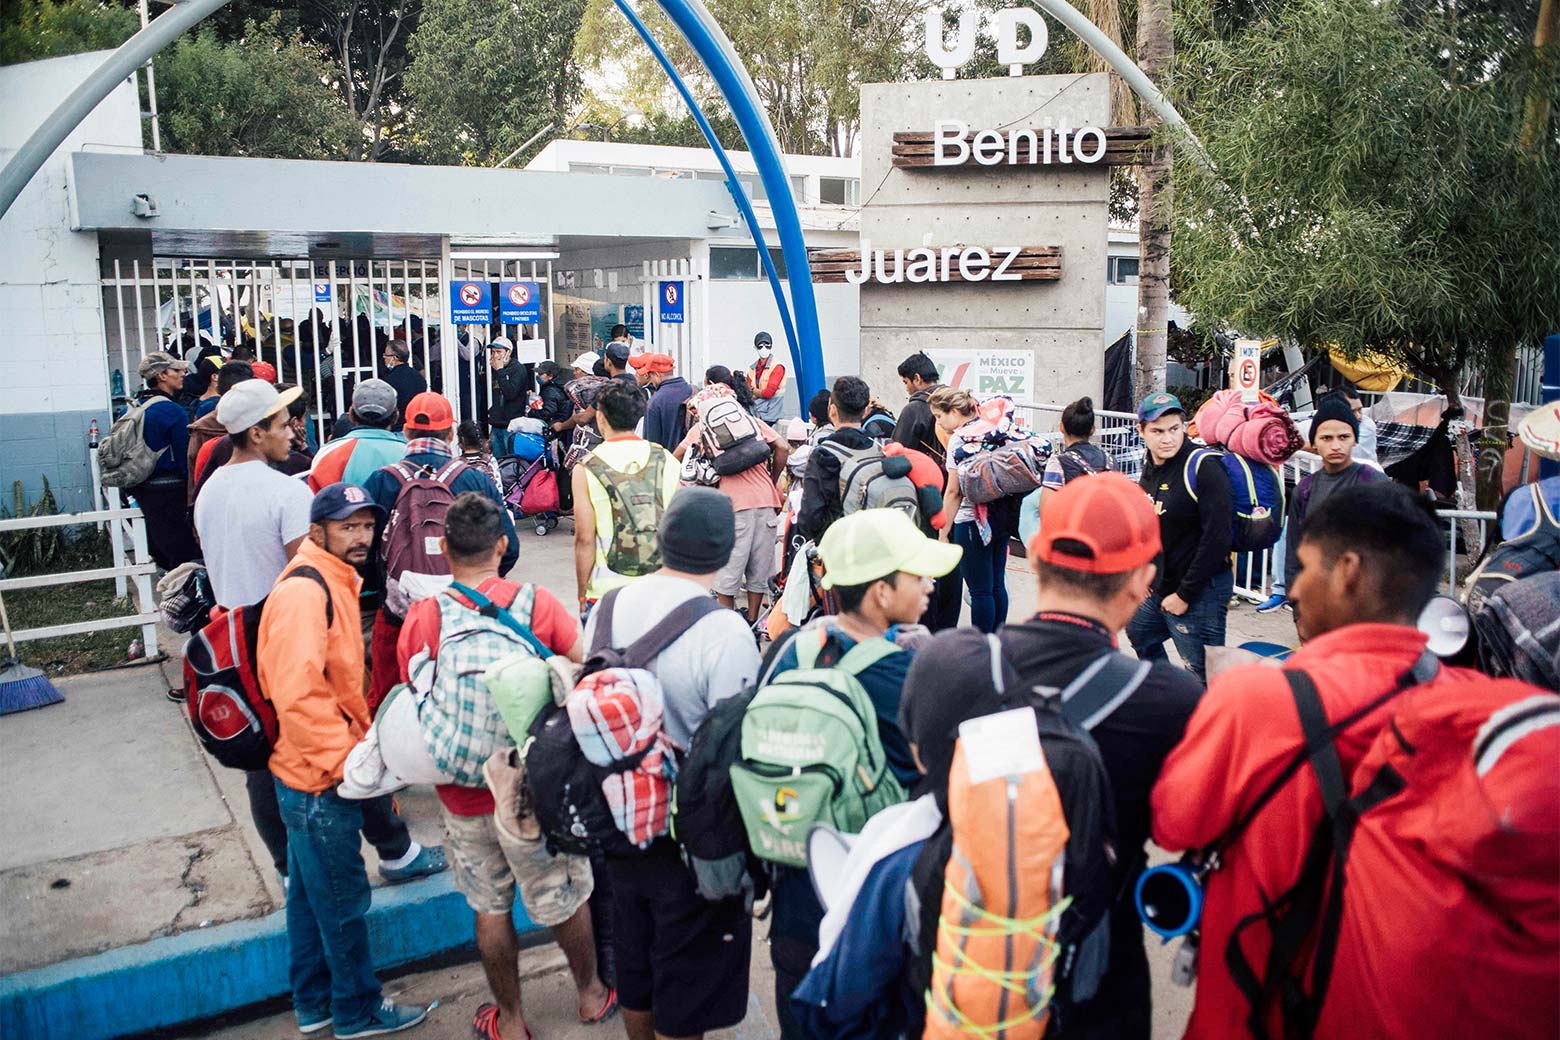 A crowd of people wearing backpacks standing outside of a stadium gate.